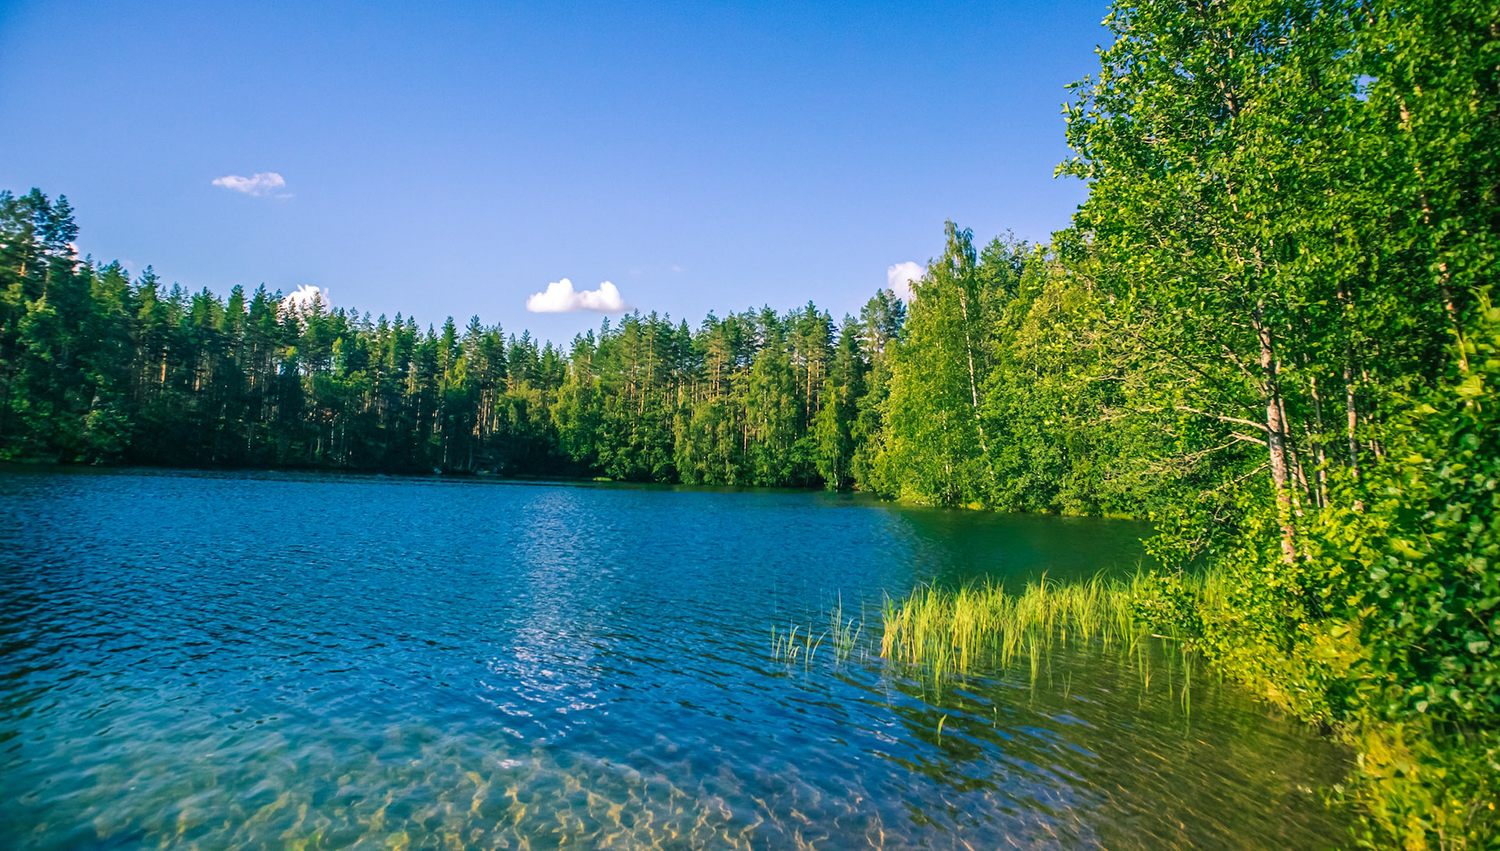 photo of a small lake surrounded by green trees and blue sky over head